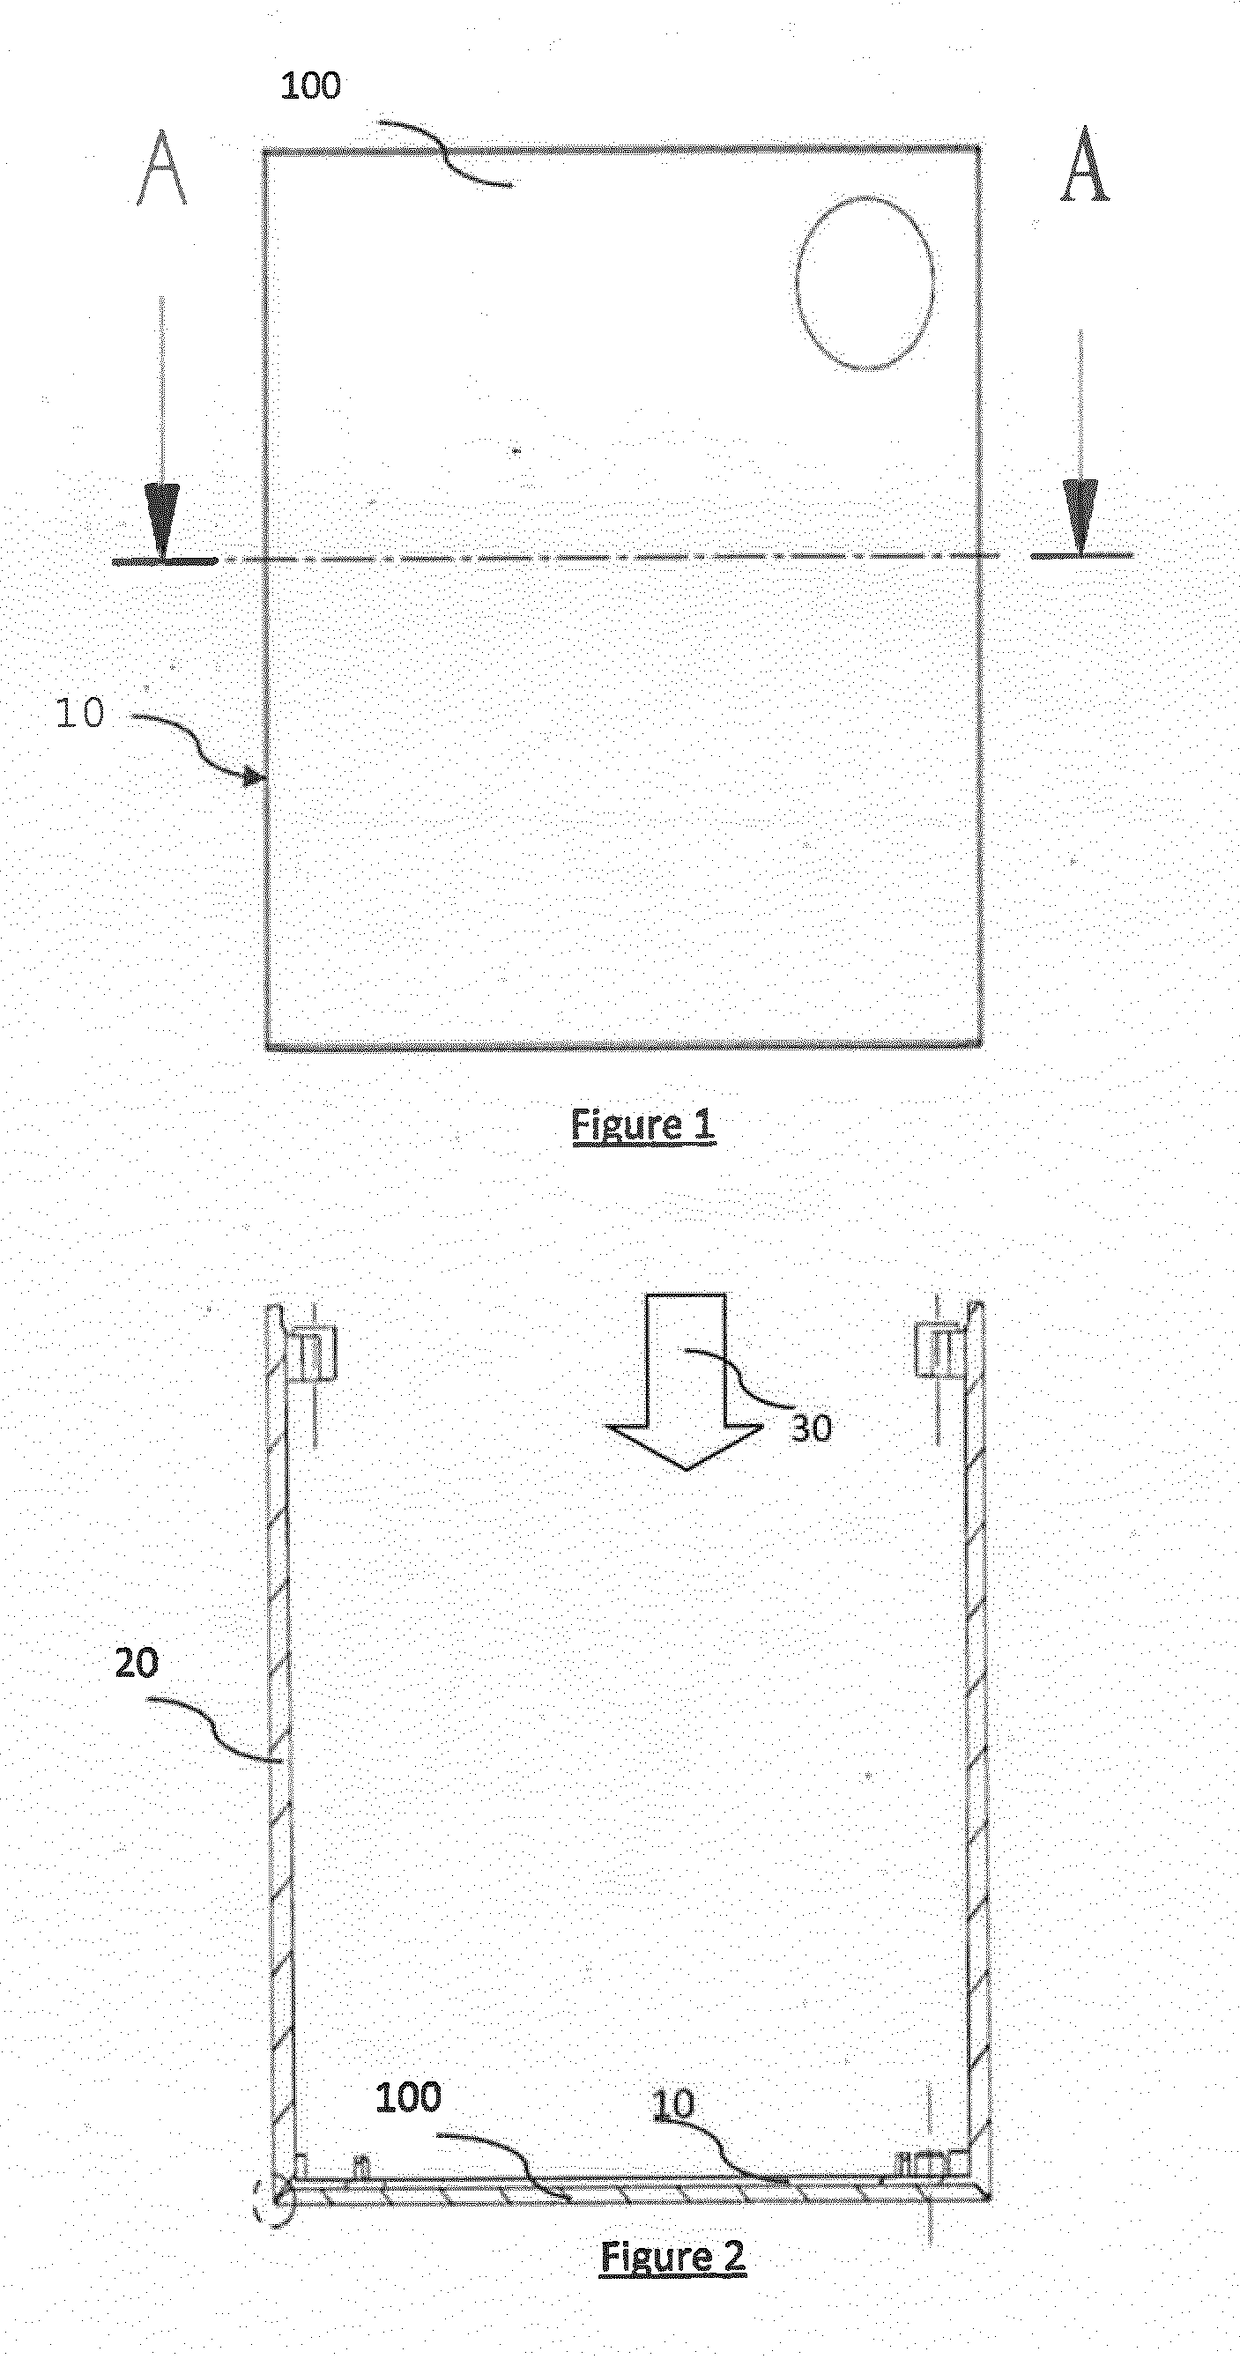 Method for obtaining an electronic device housing panel and corresponding housing, device and apparatus